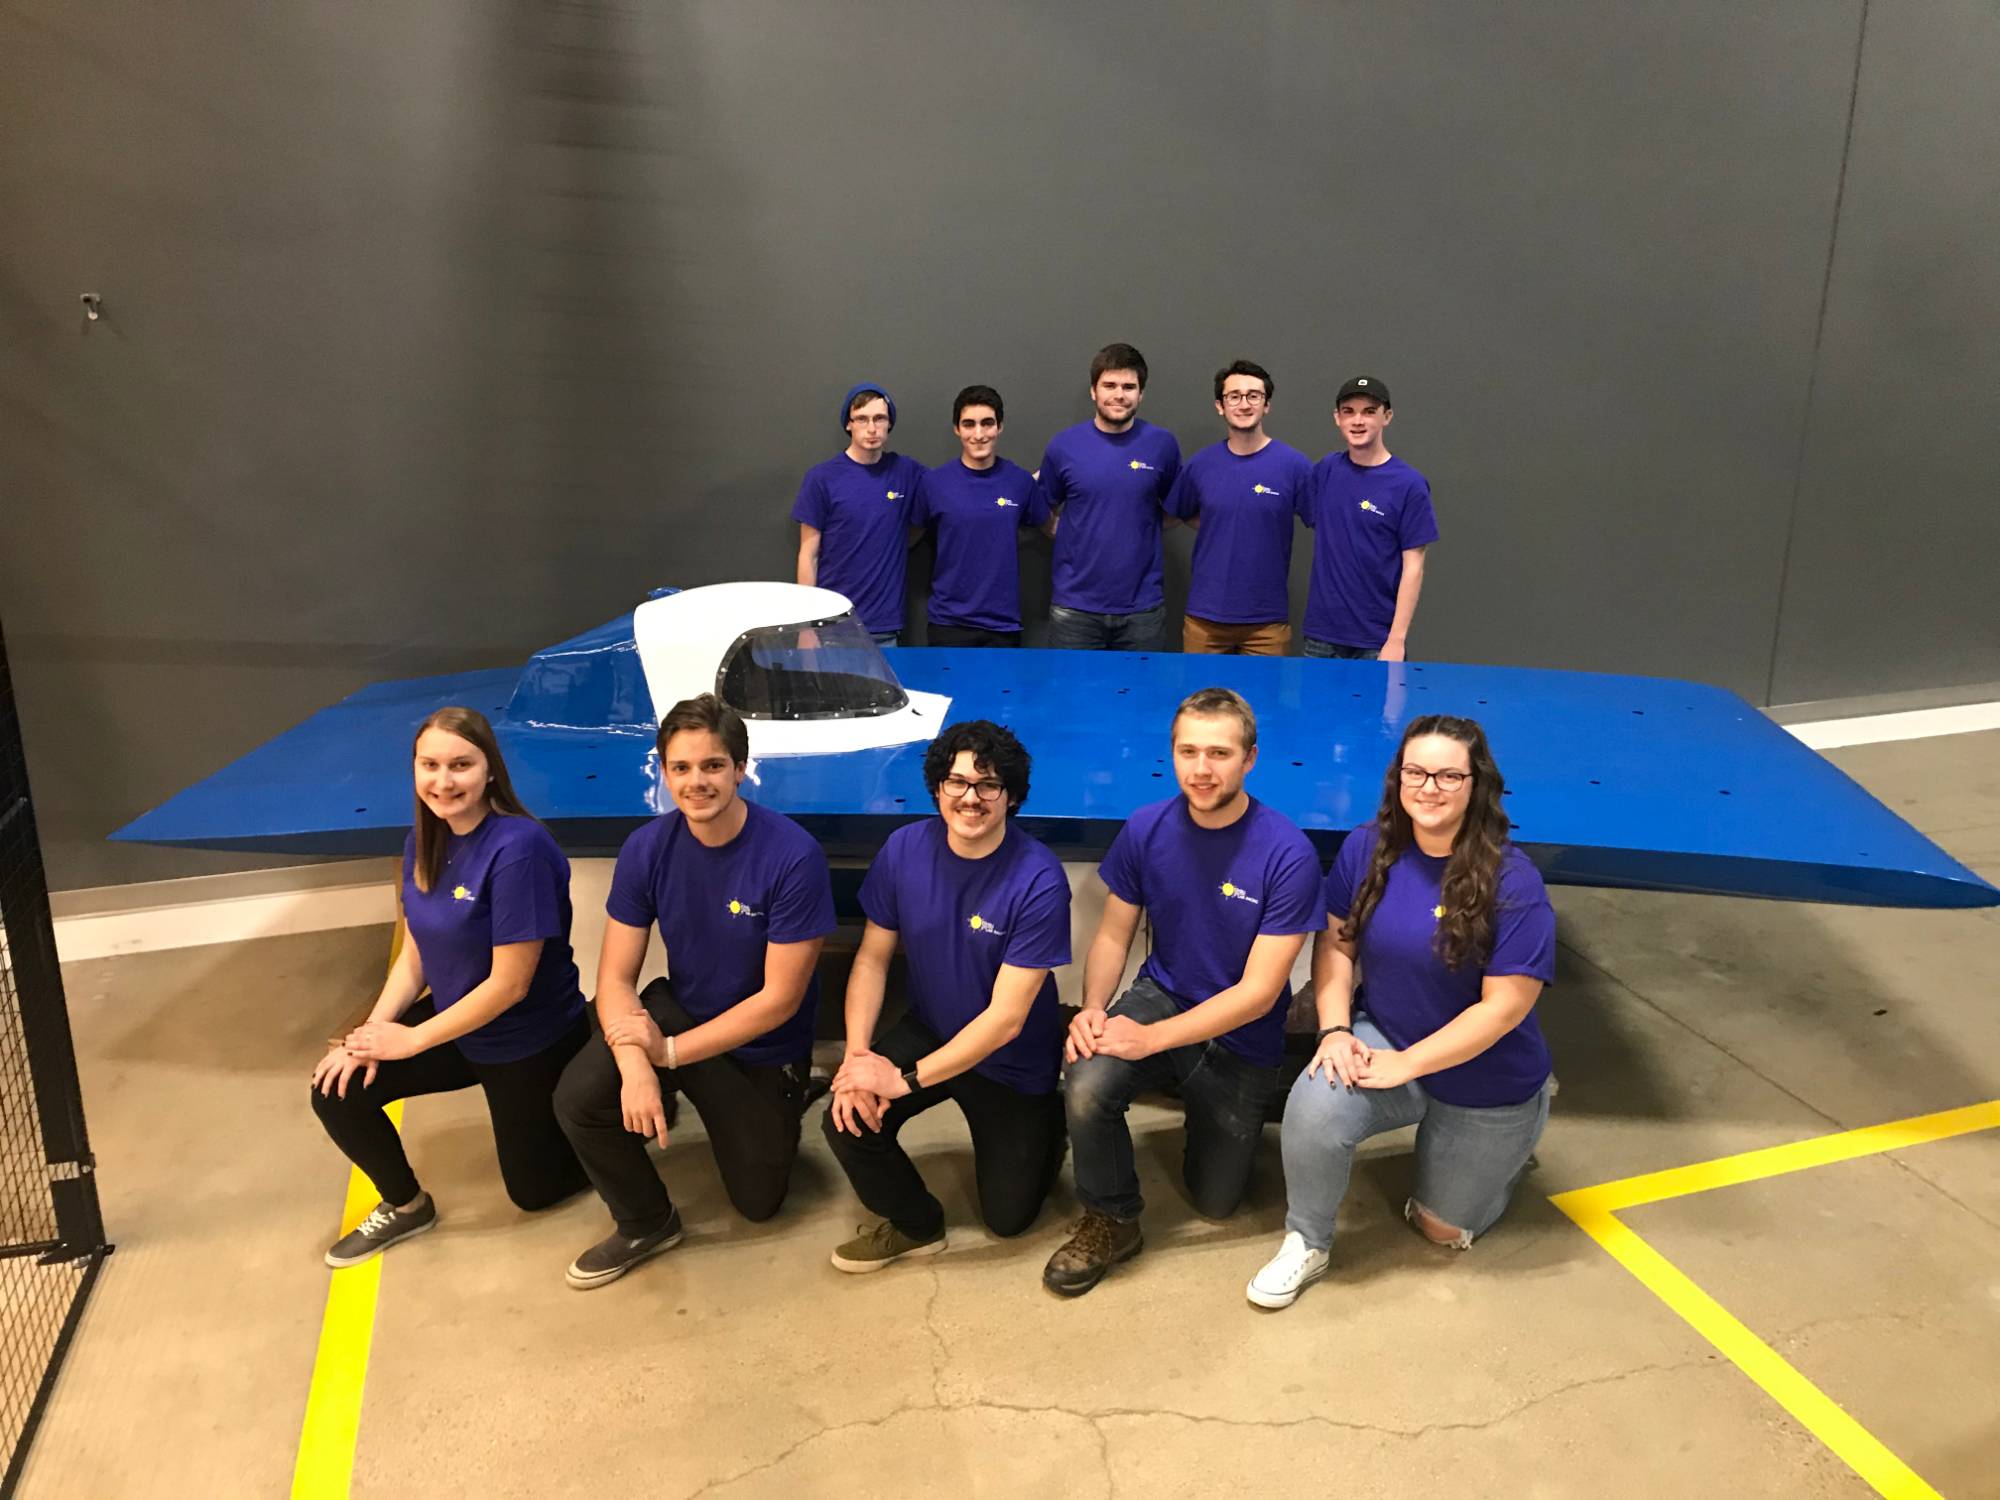 Students in front of the solar racing vehicle